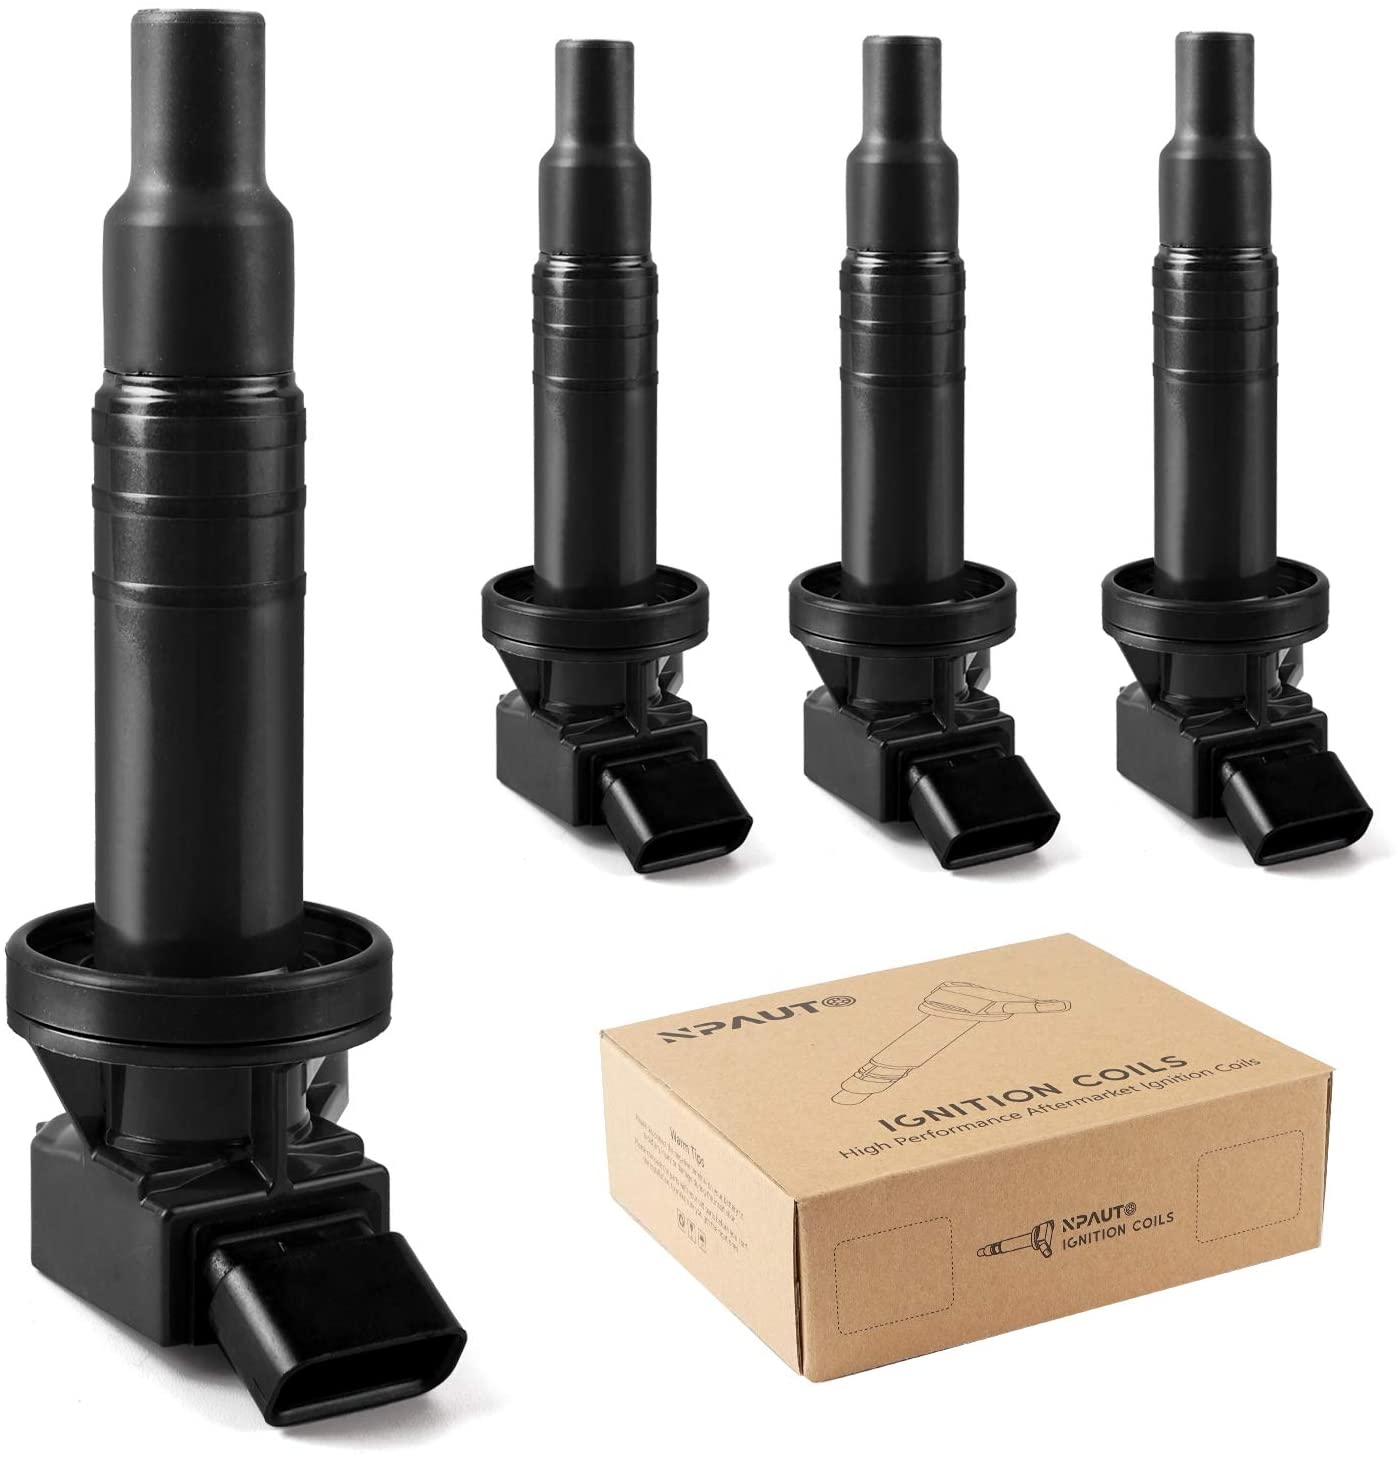 NPAUTO Ignition Coils Pack Compatible with Engine 1ZZFE L4 1.8L 2000-2008 Toyota Corolla,2000-2005 Celica GT, 2003-2008 Matrix, 2000-2005 MR2 Spyder, Pontiac Vibe, 2000-2002 Prizm, Pack of 4